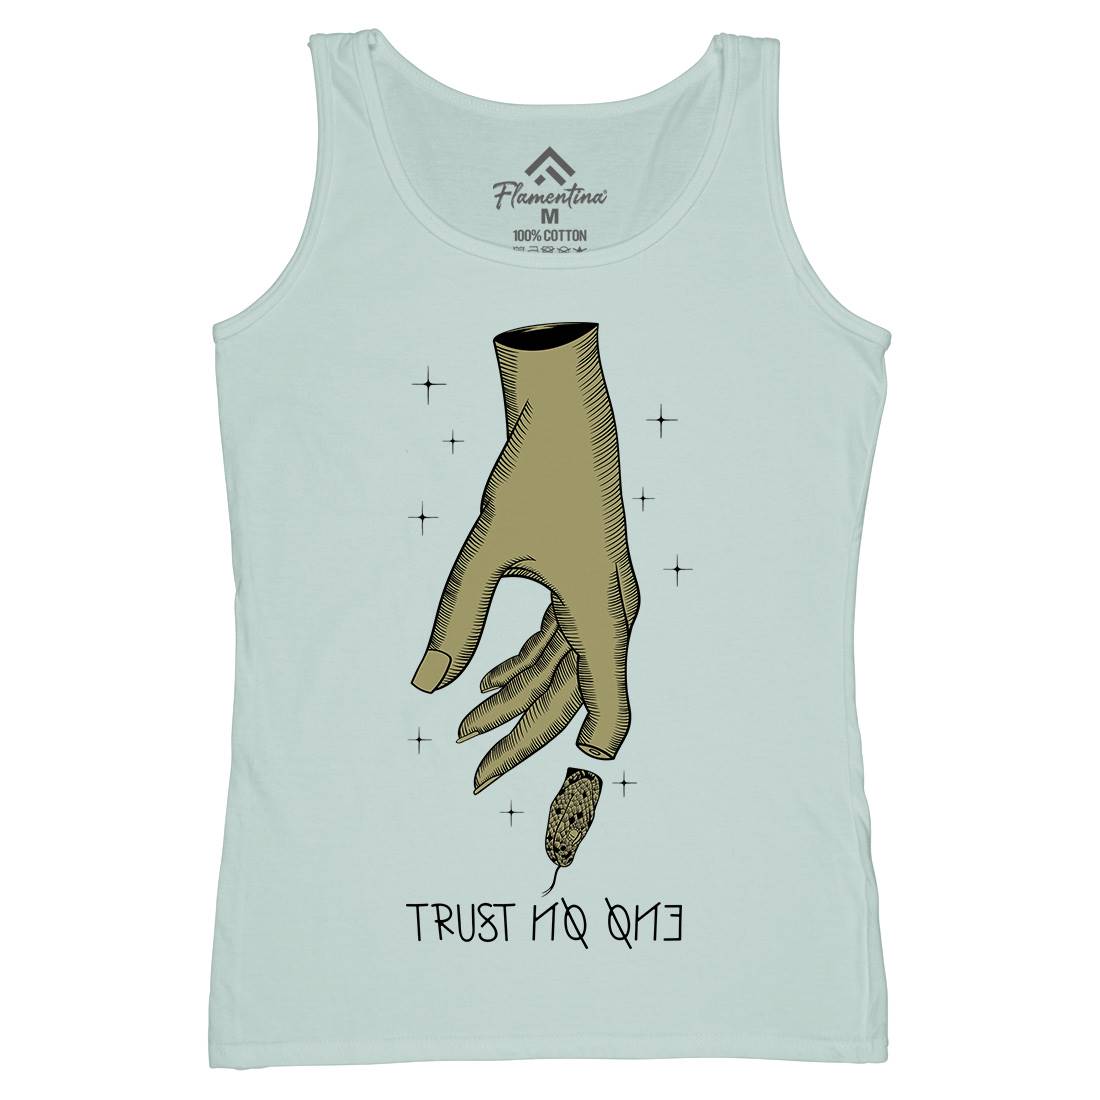 Trust No One Womens Organic Tank Top Vest Quotes D493